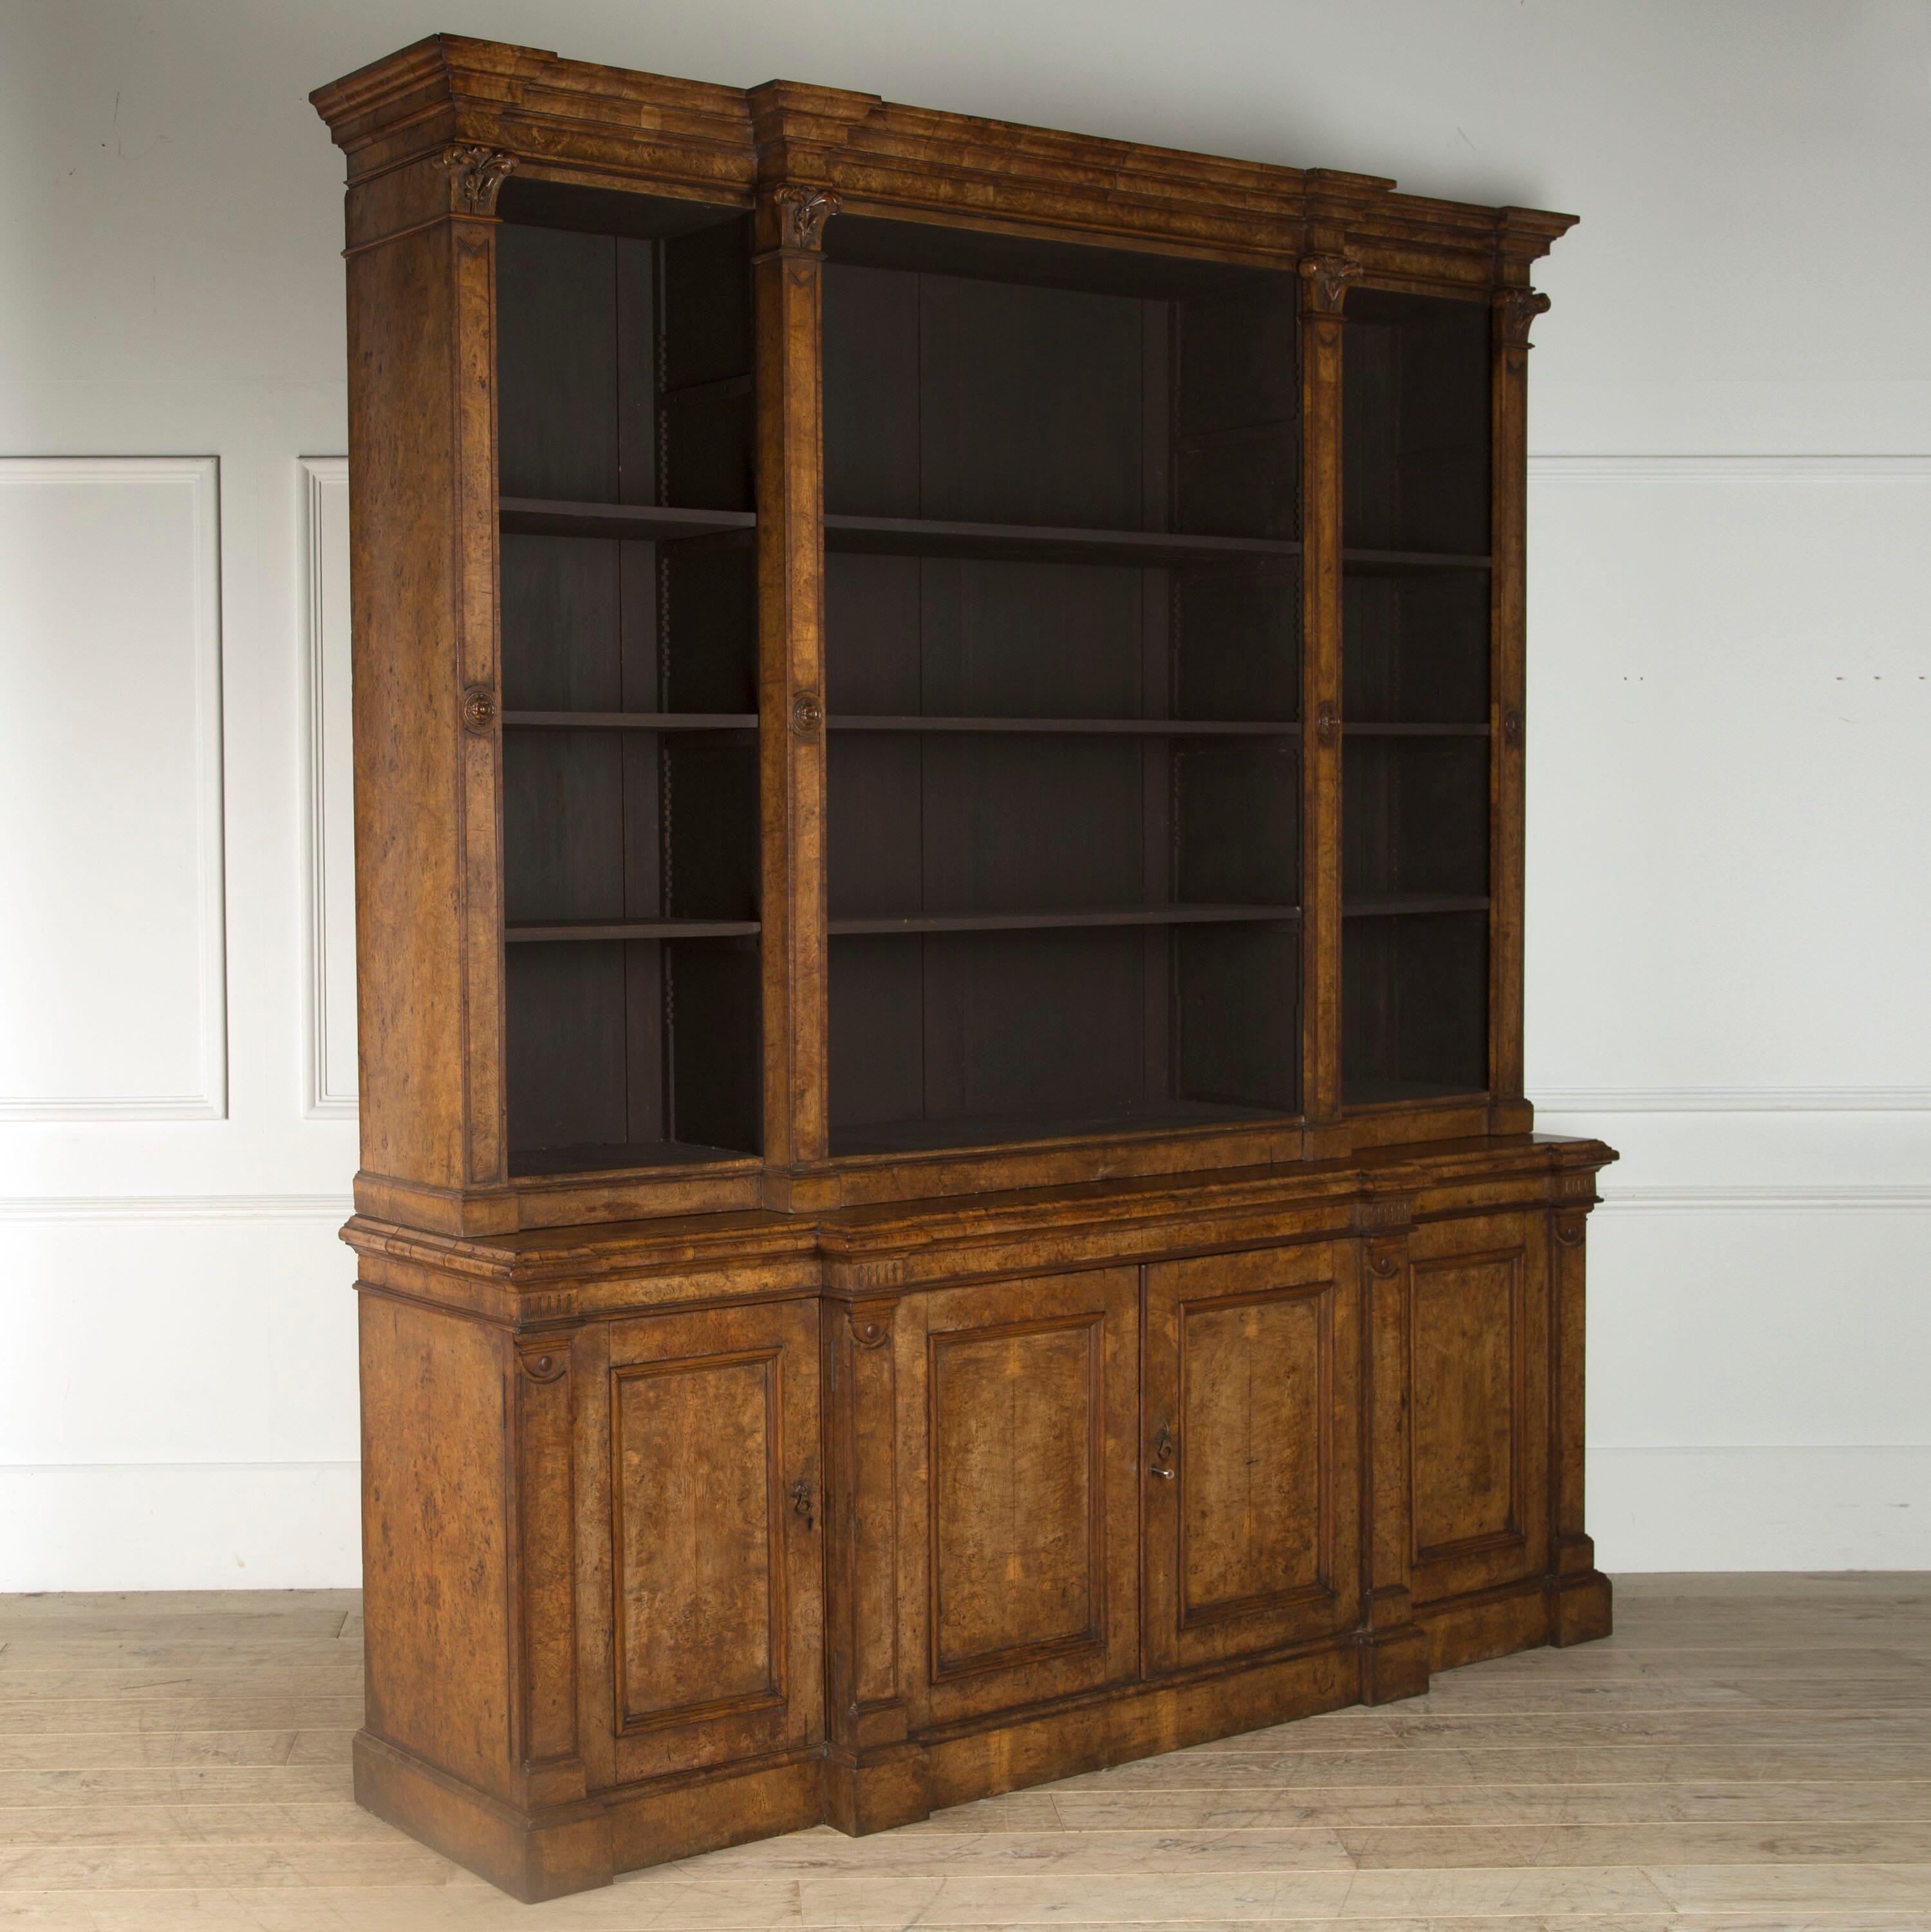 A 19th century pollard oak library bookcase of breakfront, neoclassical form with open adjustable shelves over 4 cupboard doors.